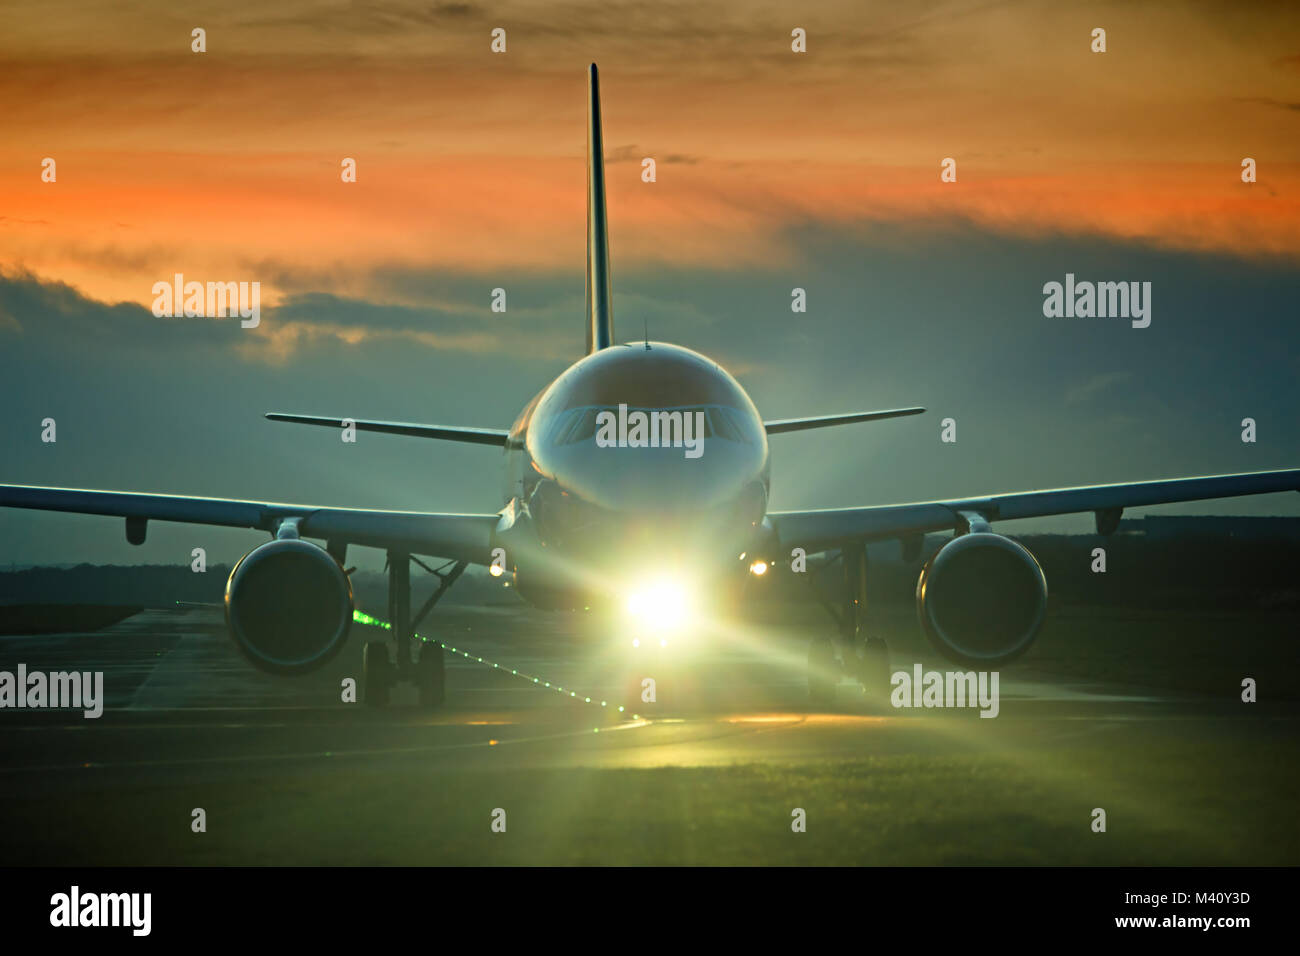 An Easyjet passenger plane taxiing out to the runway for take off at Liverpool John Lennon Airport at dusk. Stock Photo